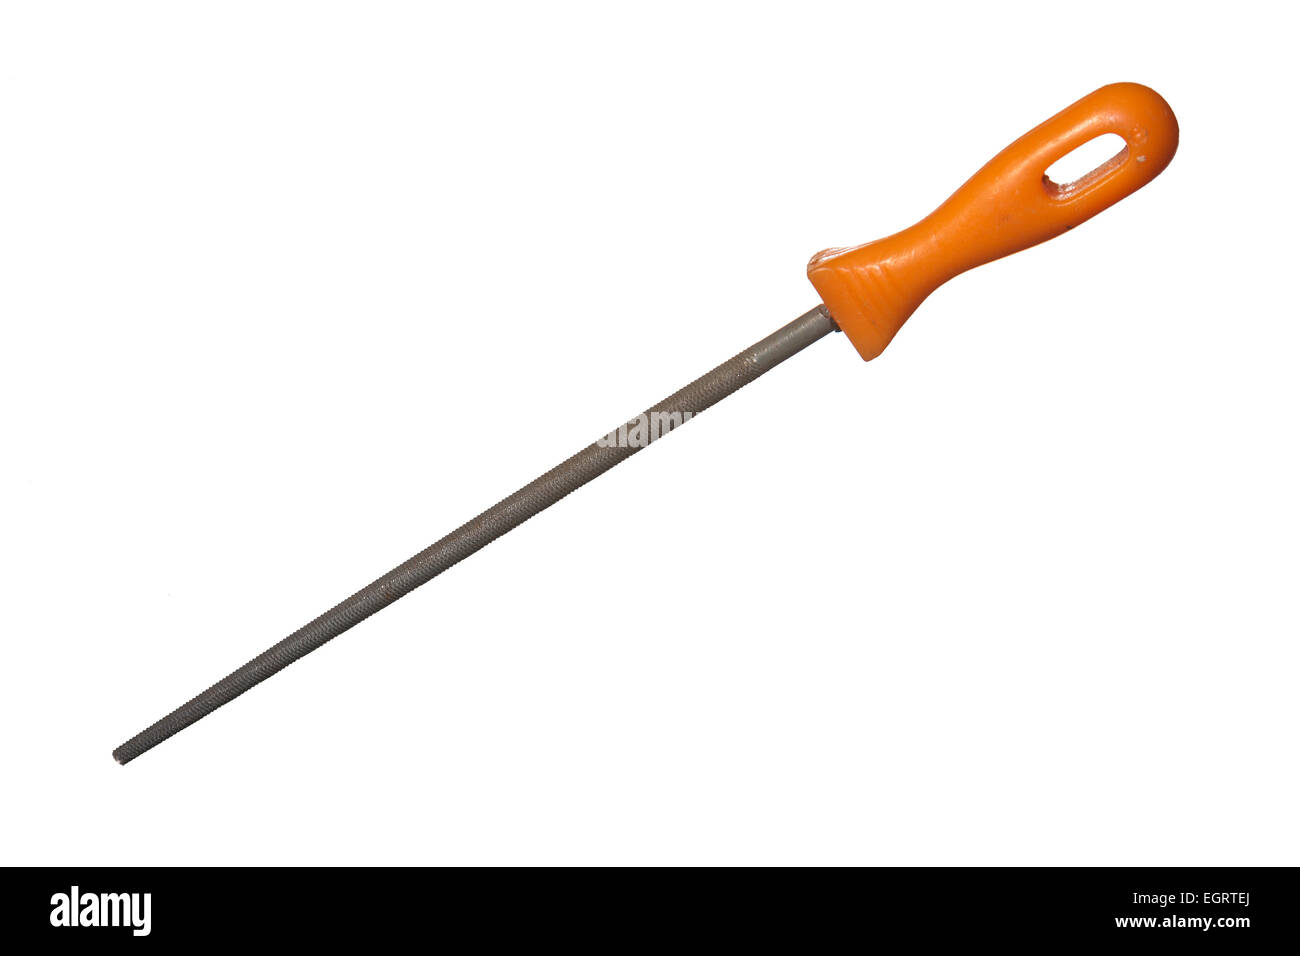 engineers steel round file tool with orange plastic handle isolated on white background suitable for cutout Stock Photo